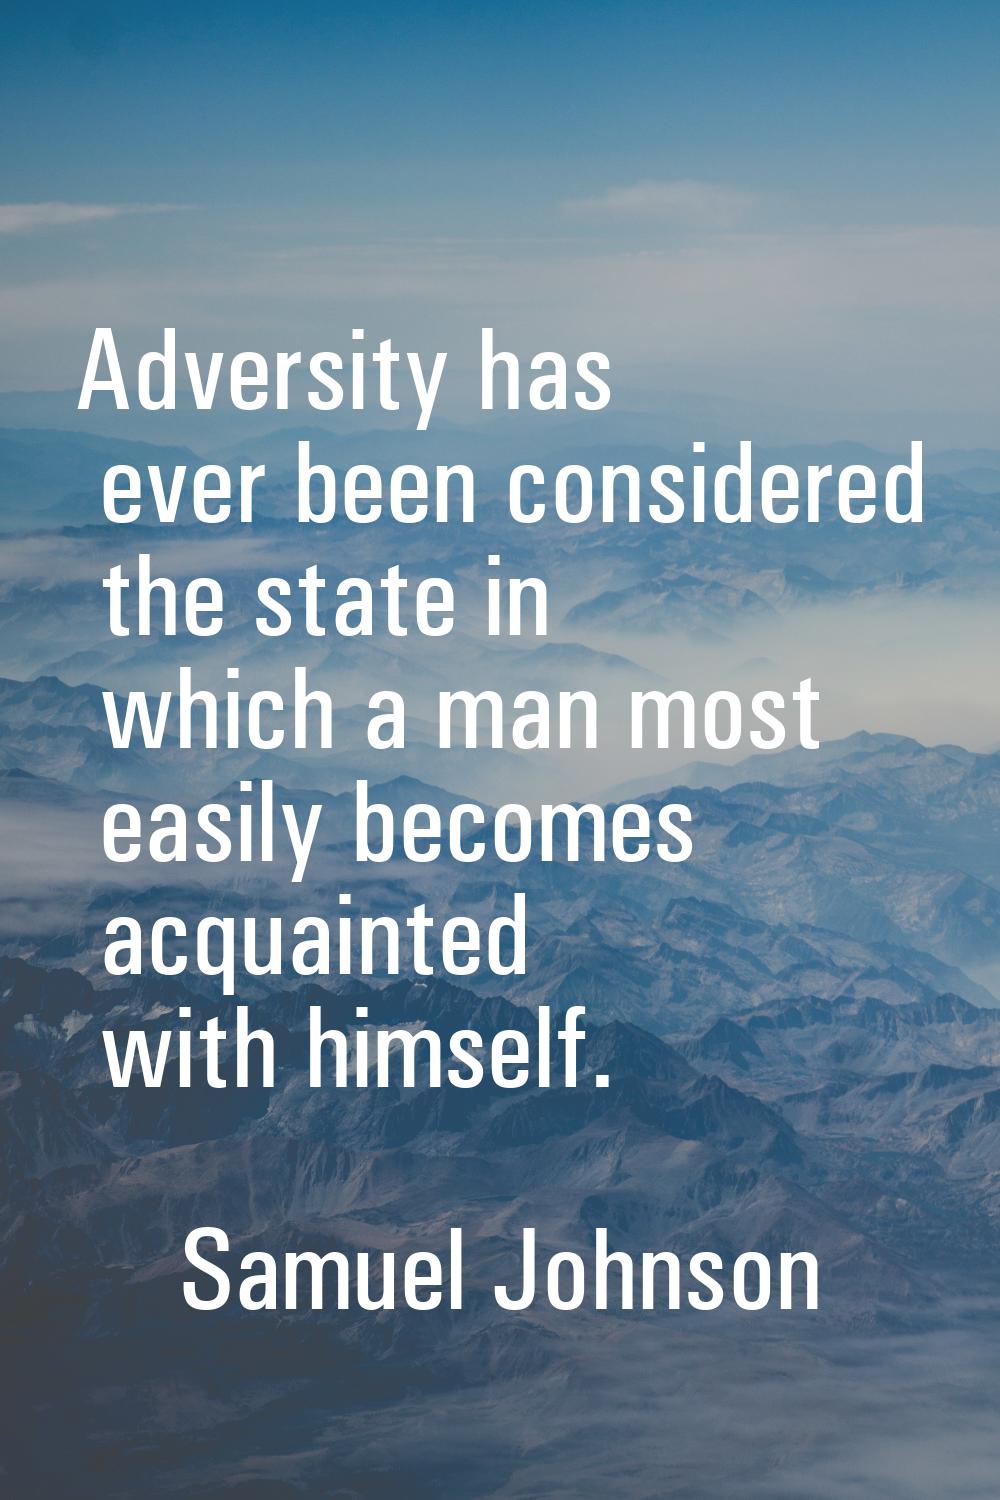 Adversity has ever been considered the state in which a man most easily becomes acquainted with him